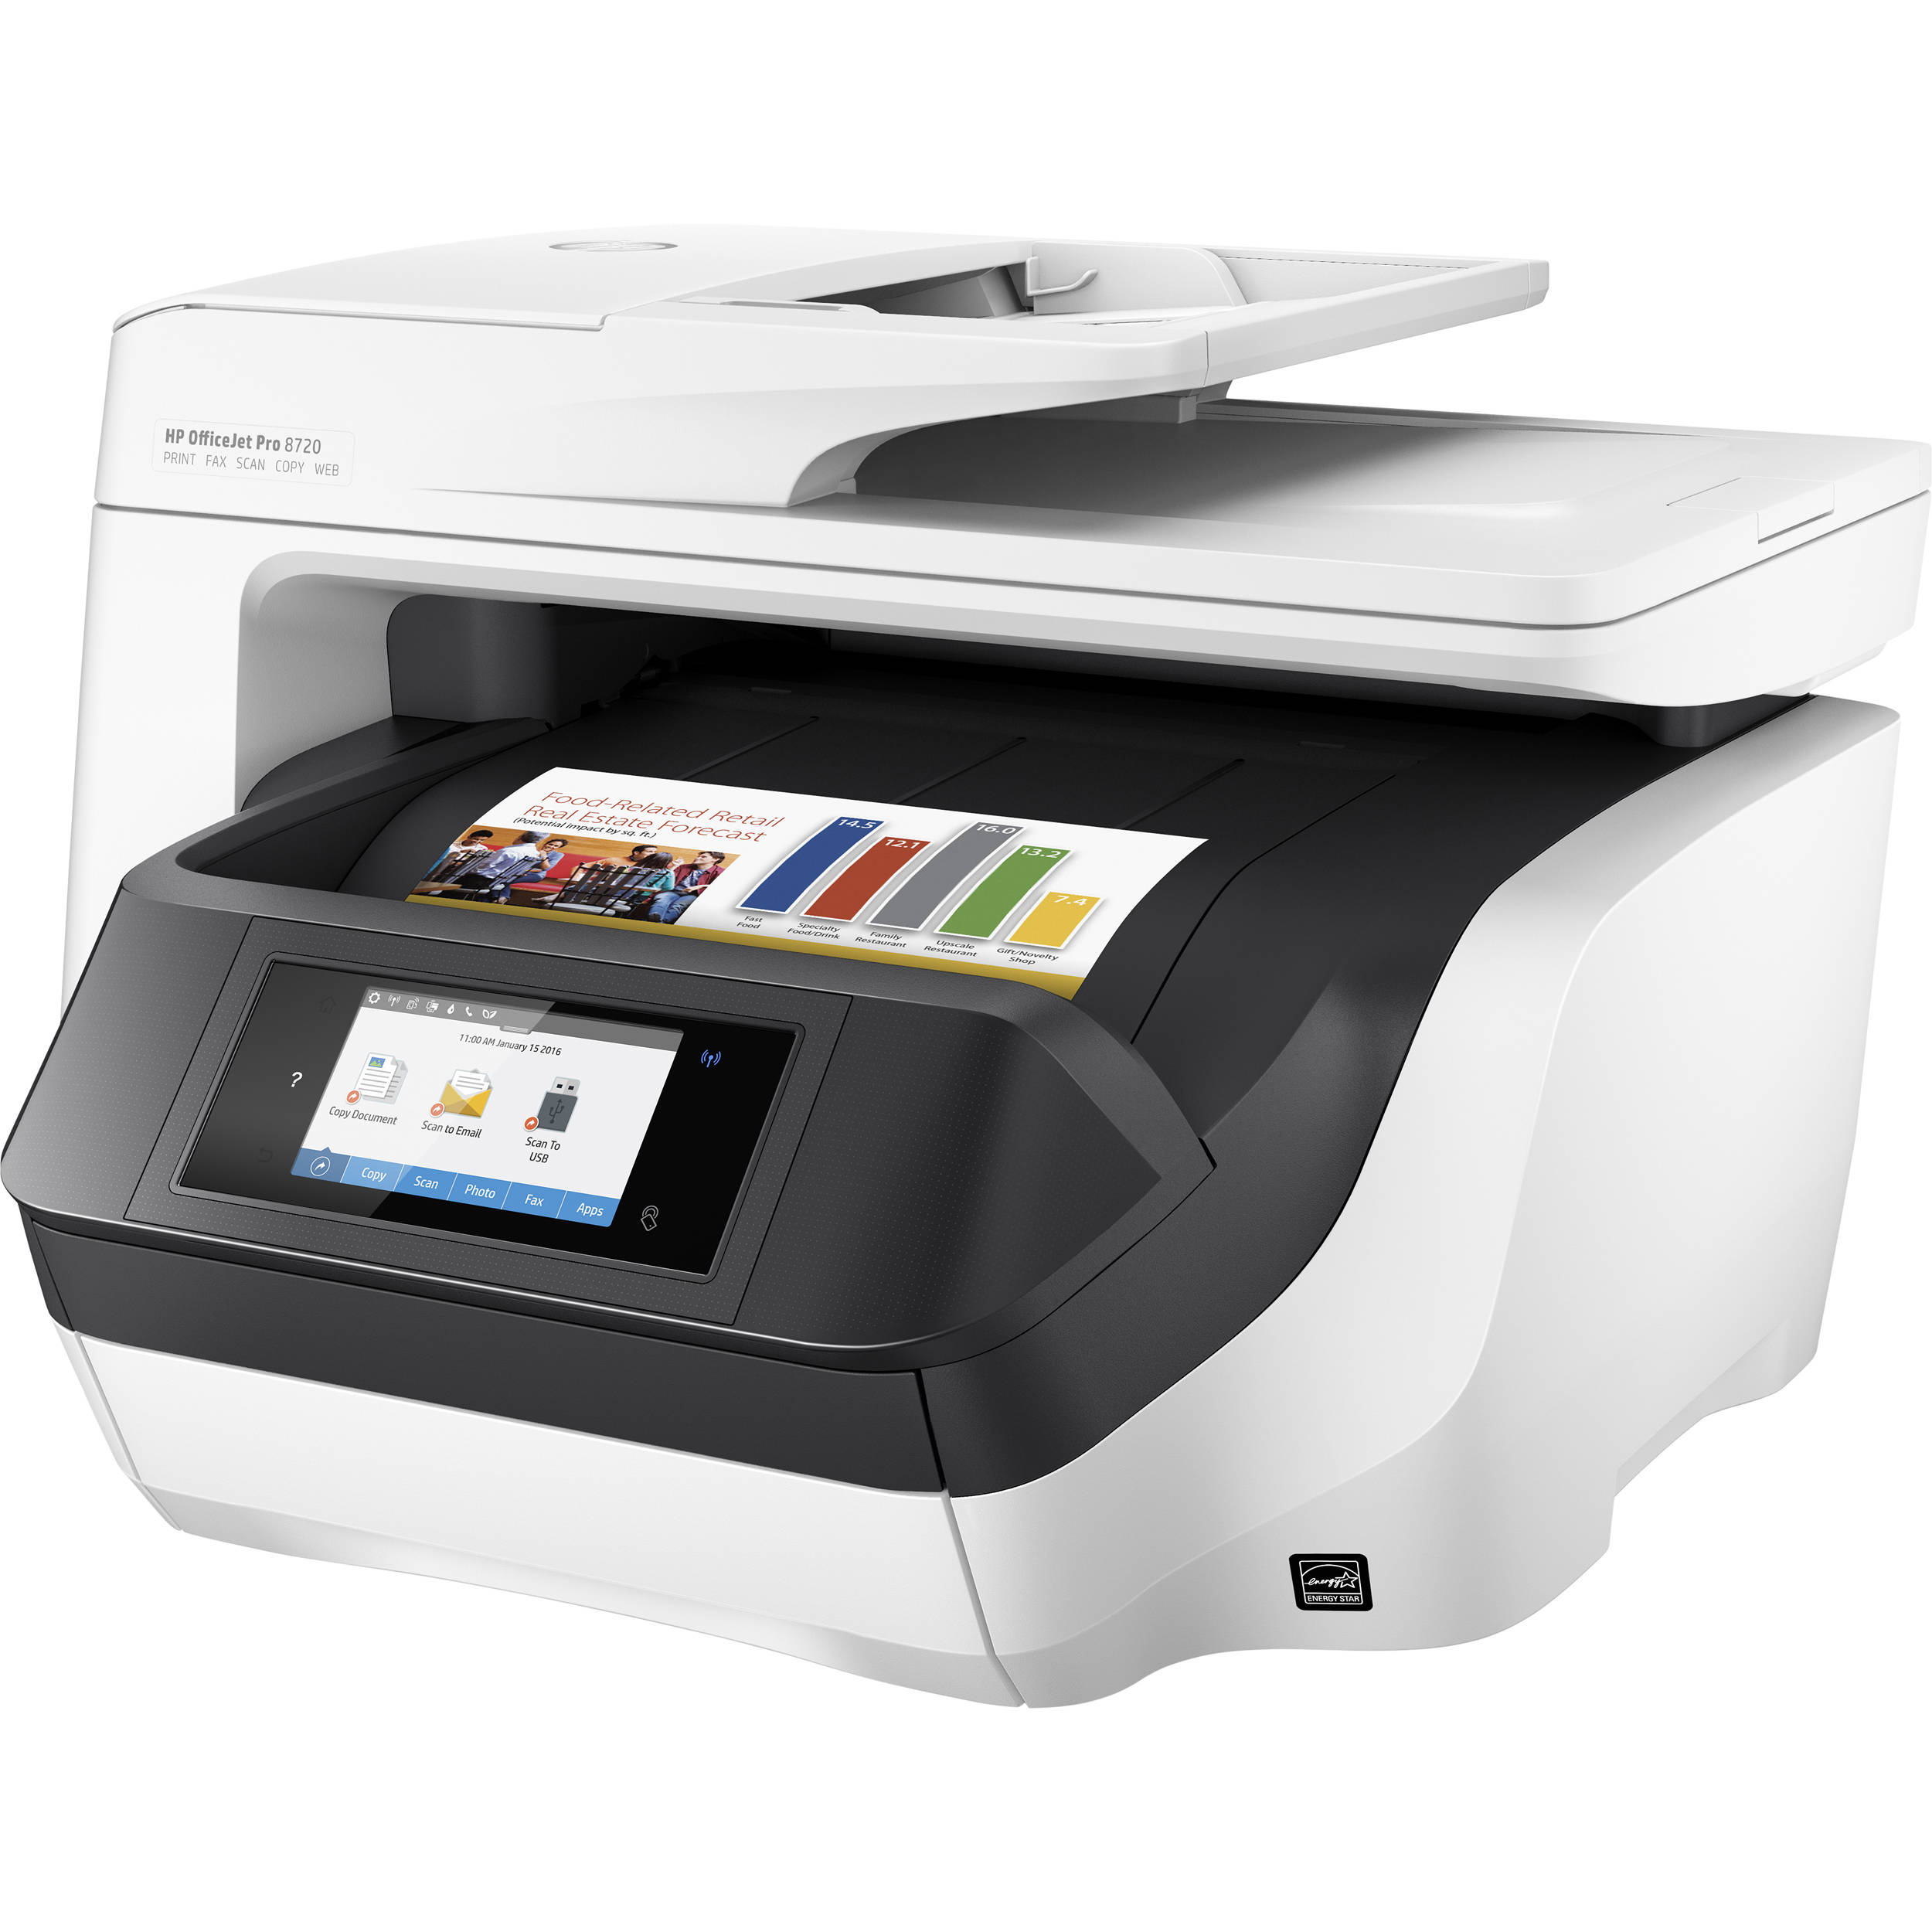 Review – HP OfficeJet Pro 8720